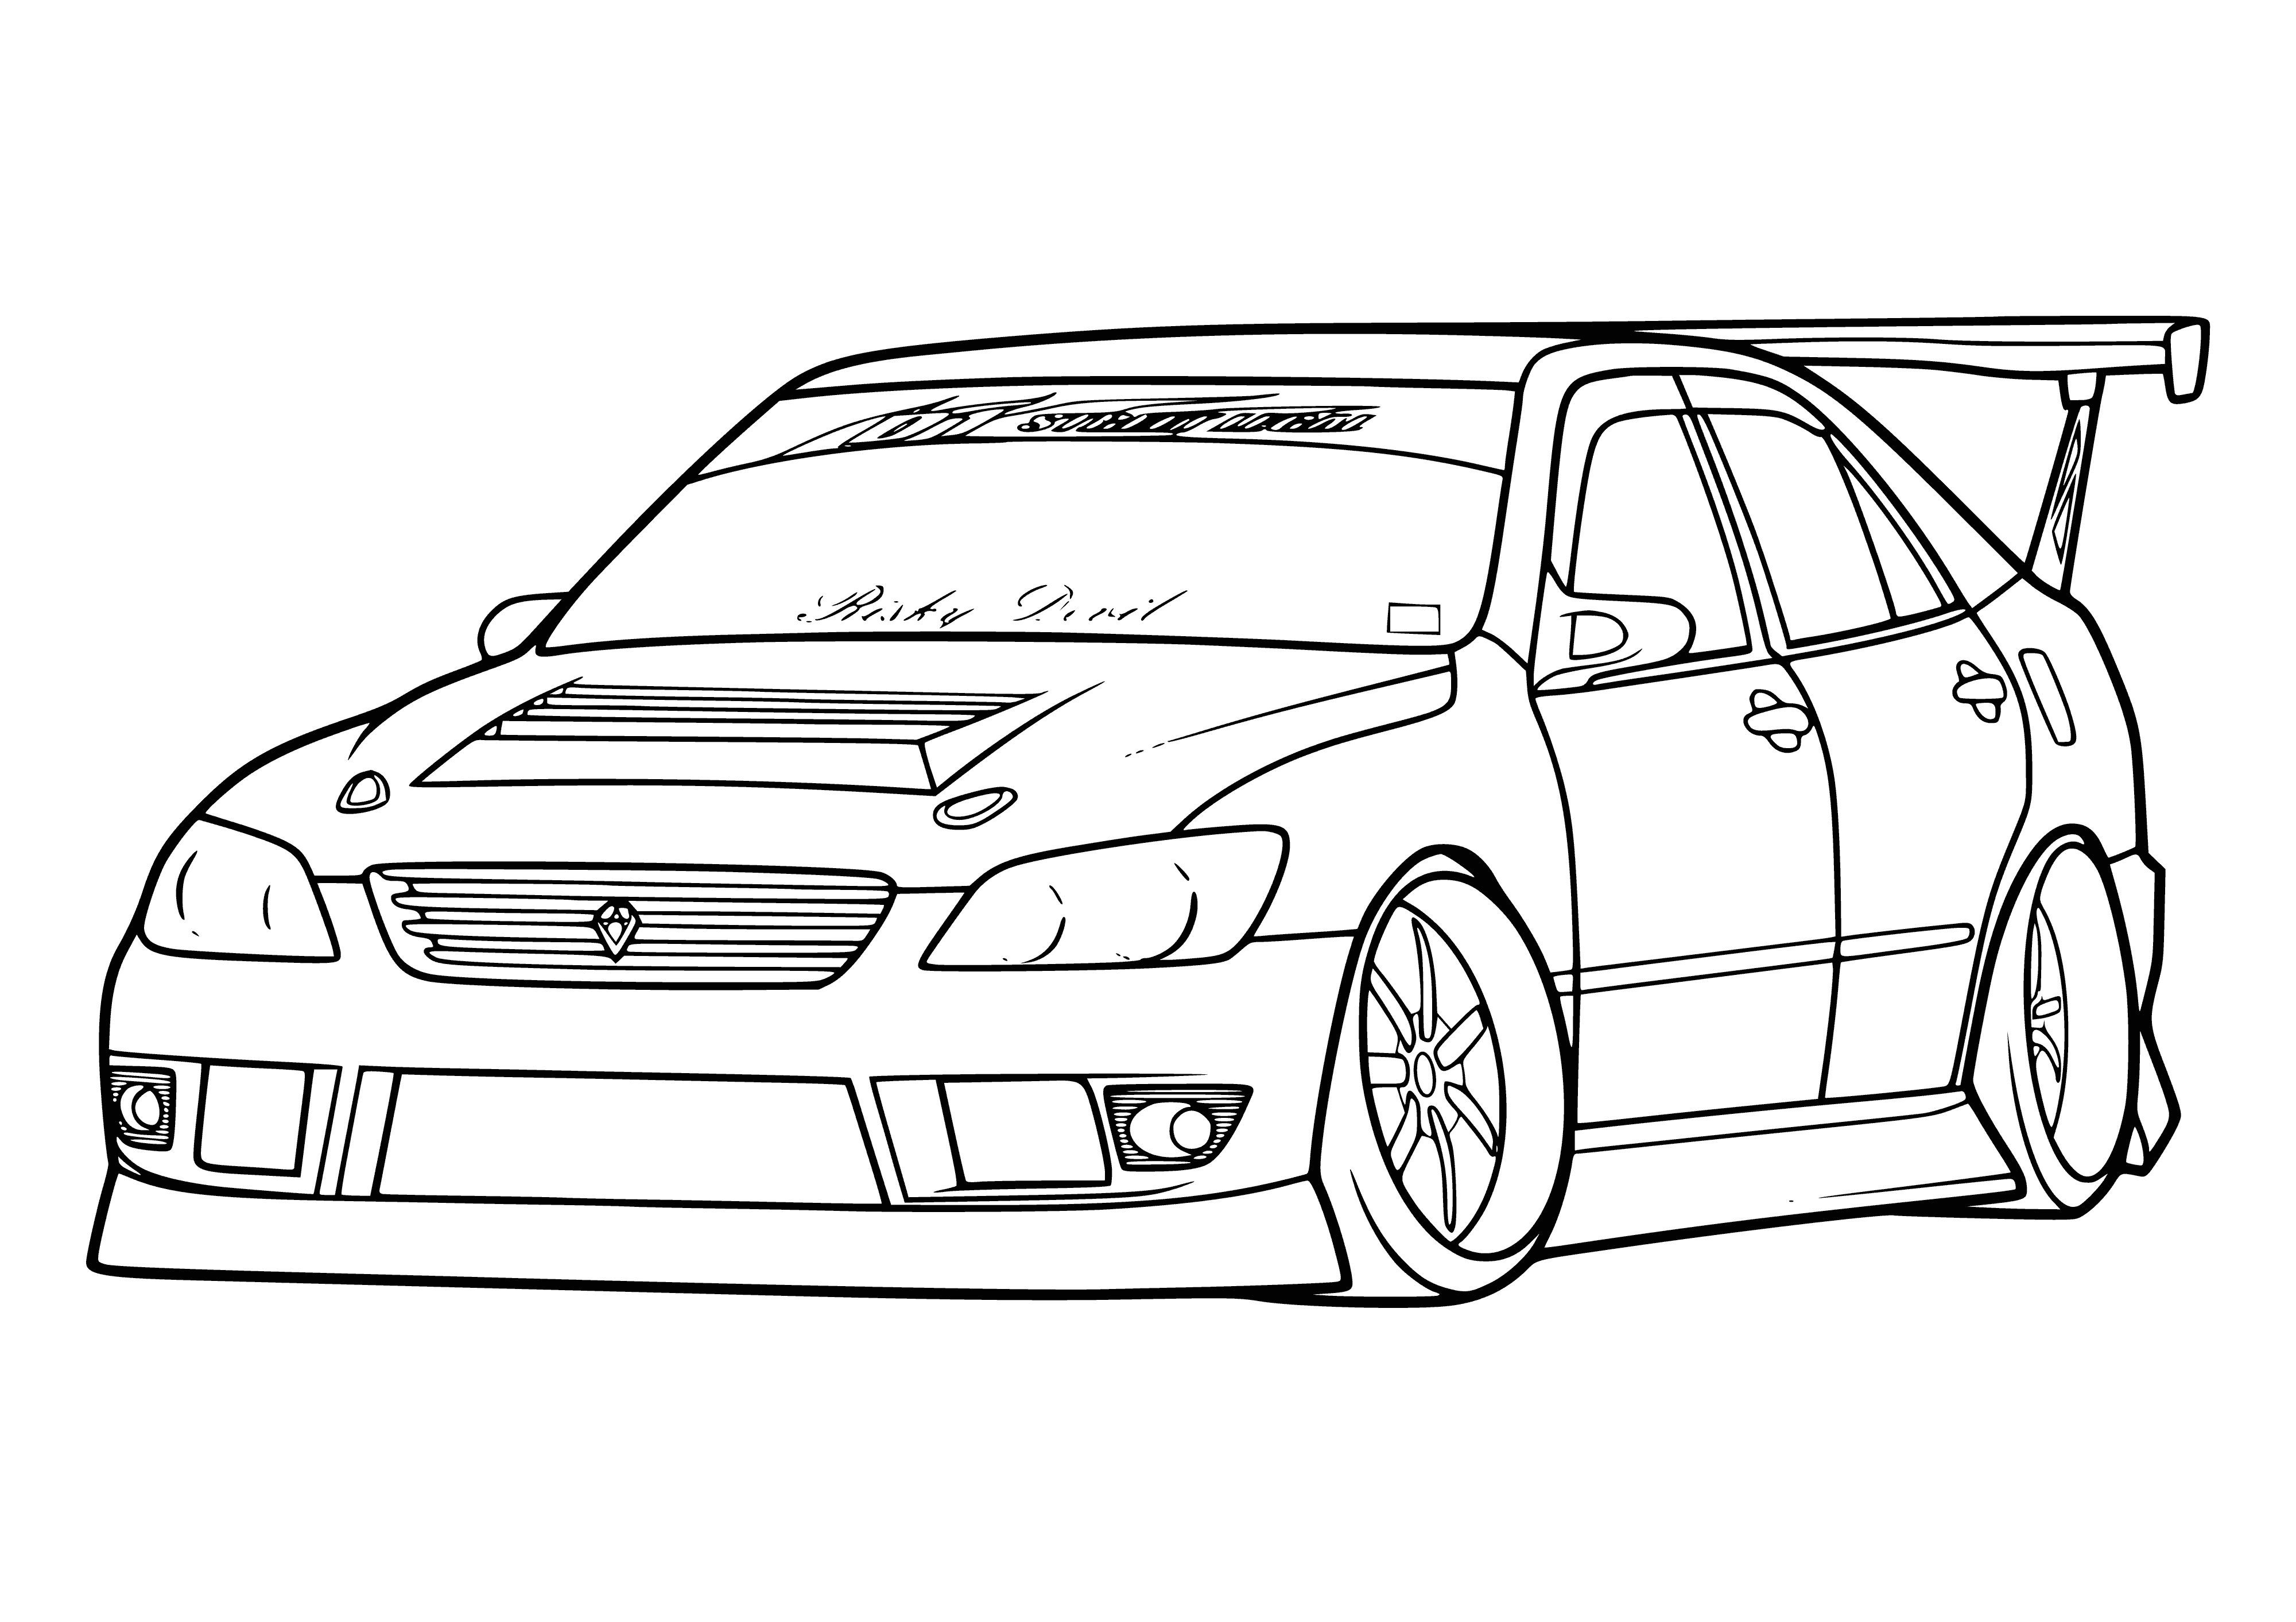 coloring page: Large red car parked on city street, four doors + spoiler, chrome accents, tinted windows.